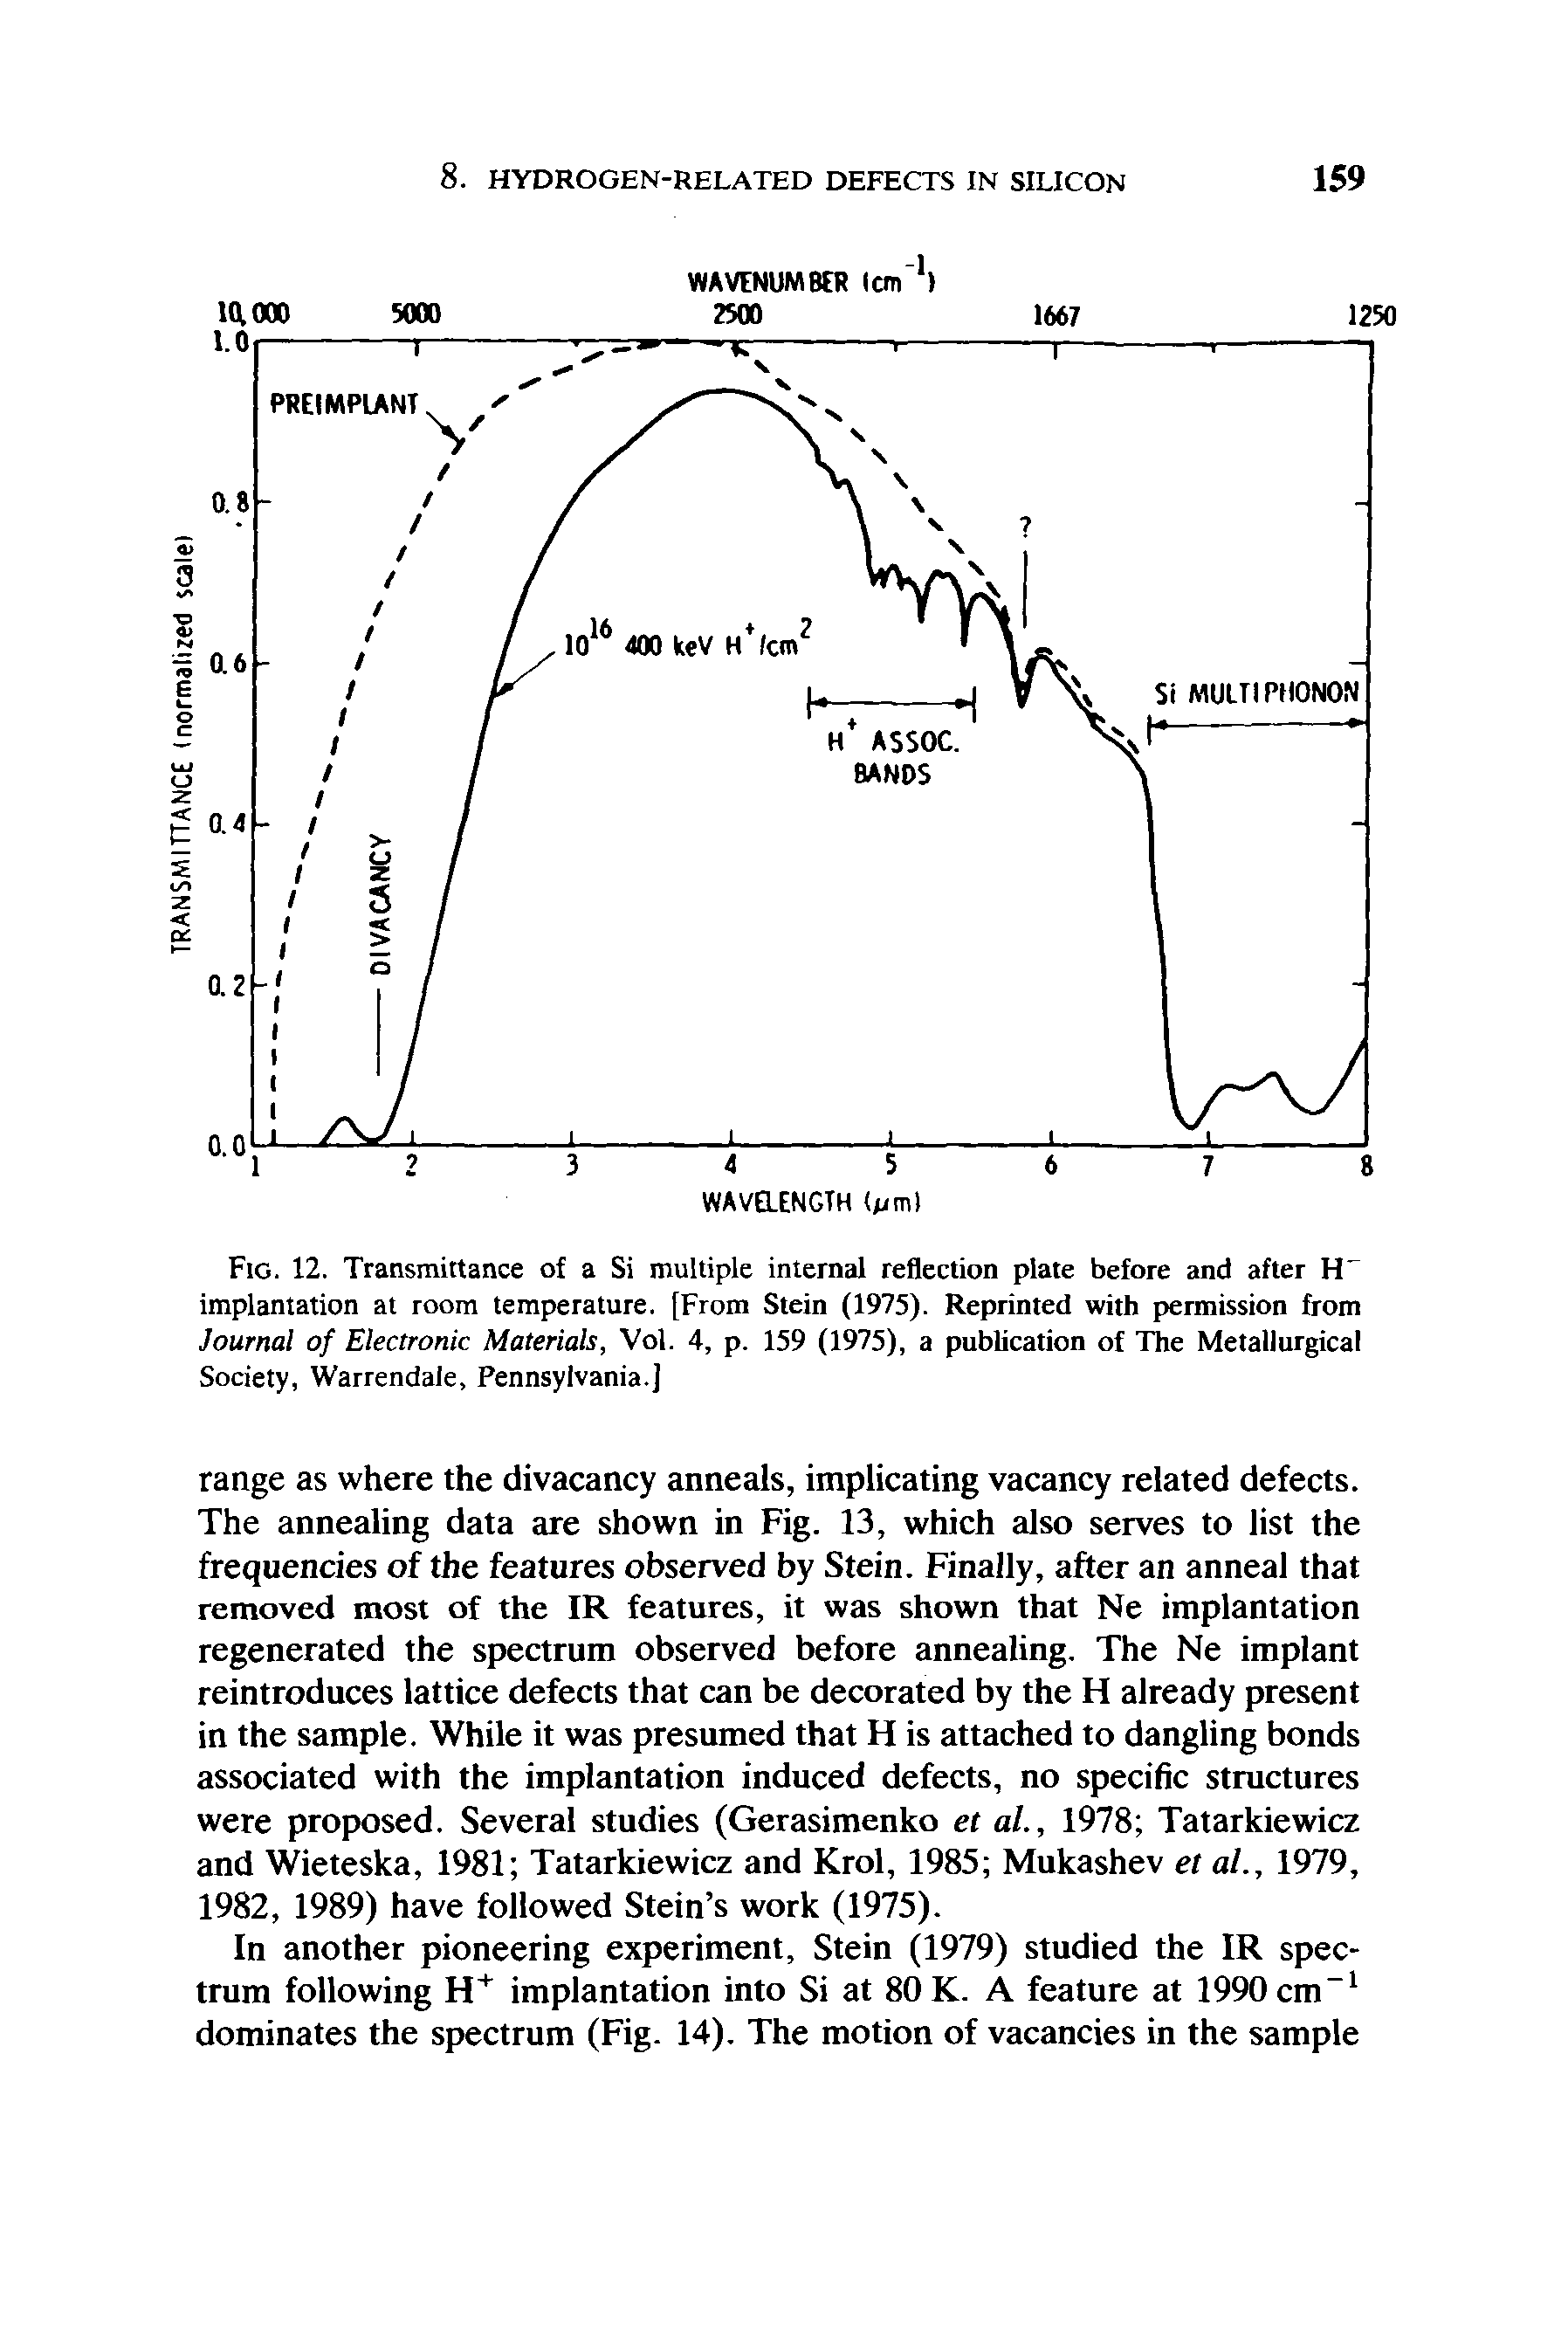 Fig. 12. Transmittance of a Si multiple internal reflection plate before and after H-implantation at room temperature. [From Stein (1975). Reprinted with permission from Journal of Electronic Materials, Vol. 4, p. 159 (1975), a publication of The Metallurgical Society, Warrendale, Pennsylvania.]...